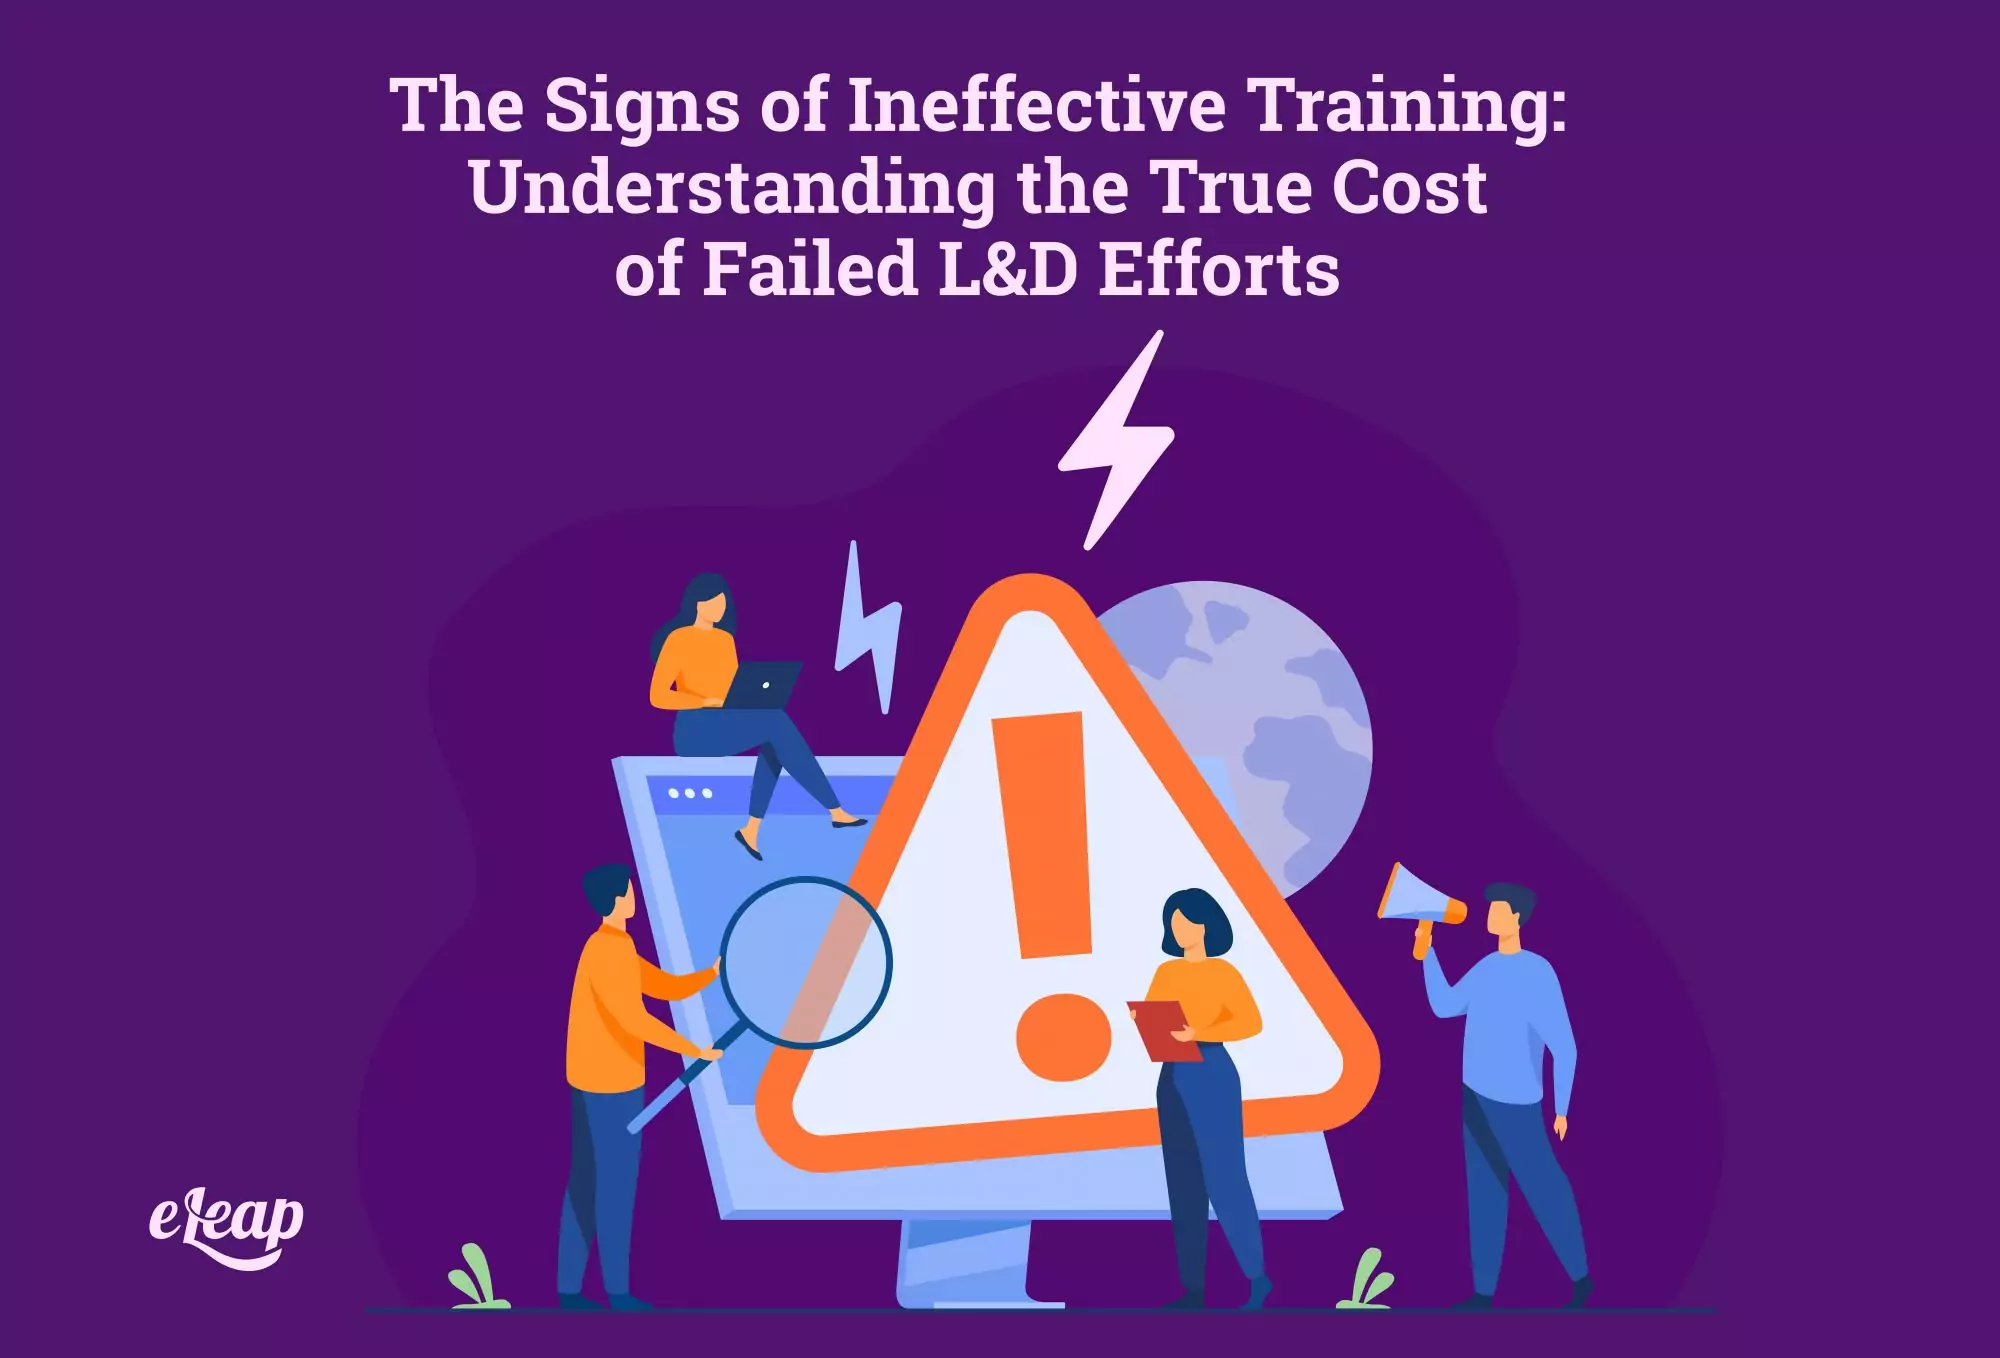 The Signs of Ineffective Training: Understanding the True Cost of Failed L&D Efforts